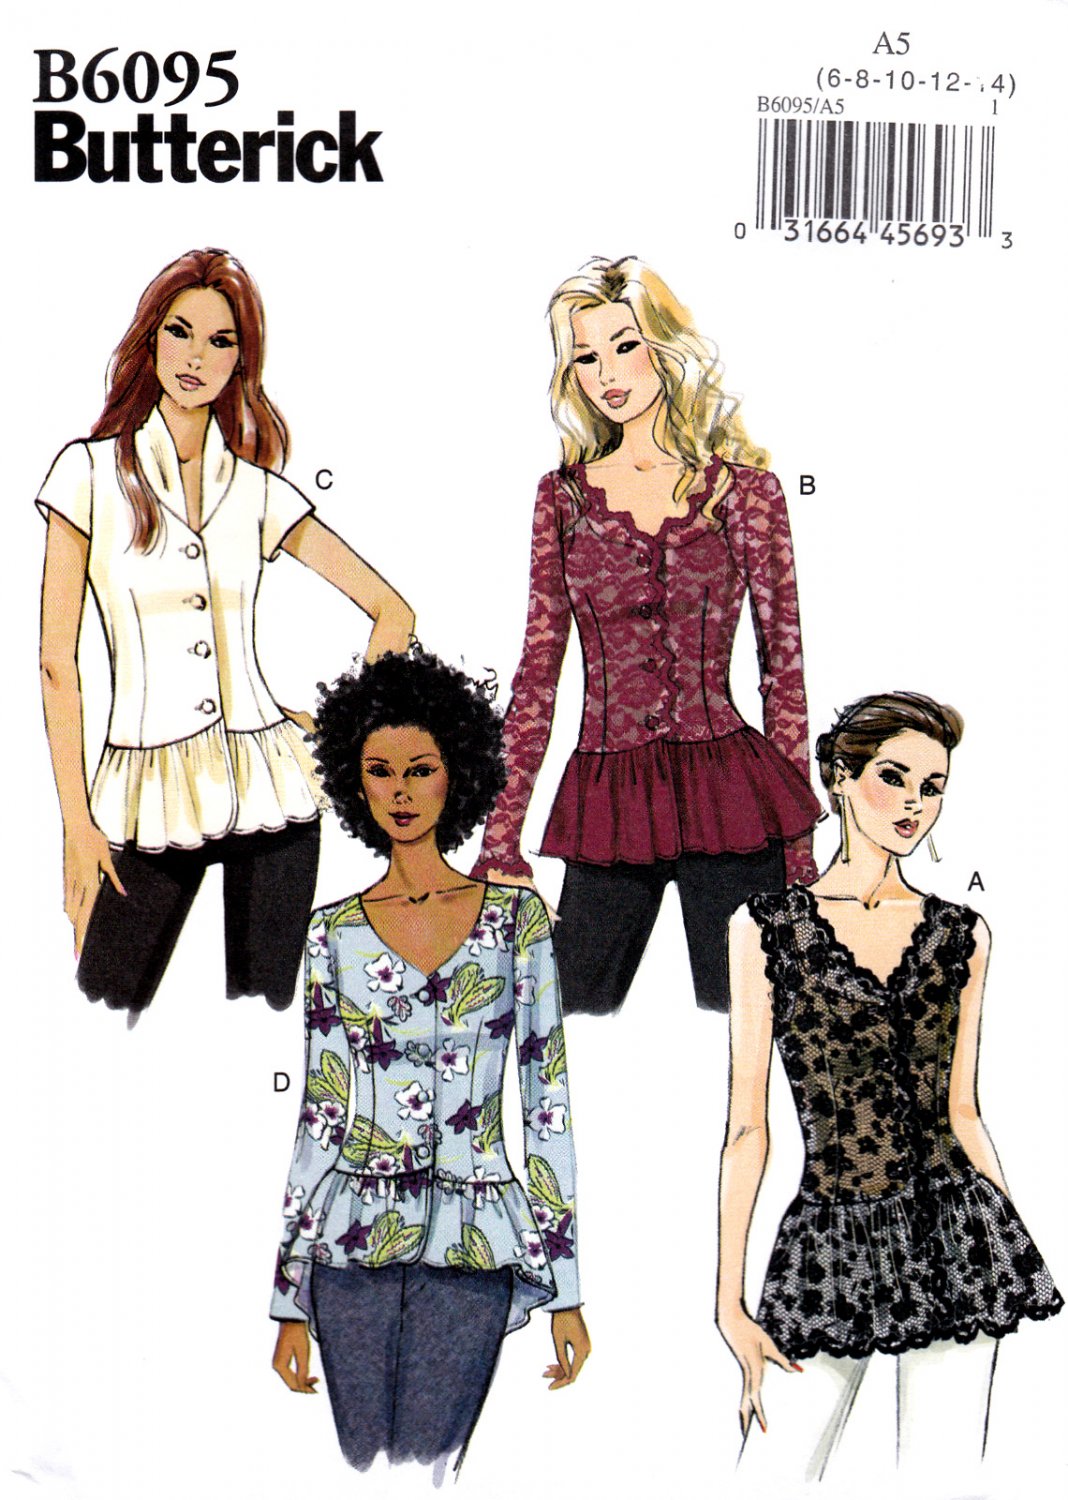 Butterick B6095 6095 Misses Tops Sewing Pattern Front Button Varying Sleeves Sizes 6-8-10-12-14